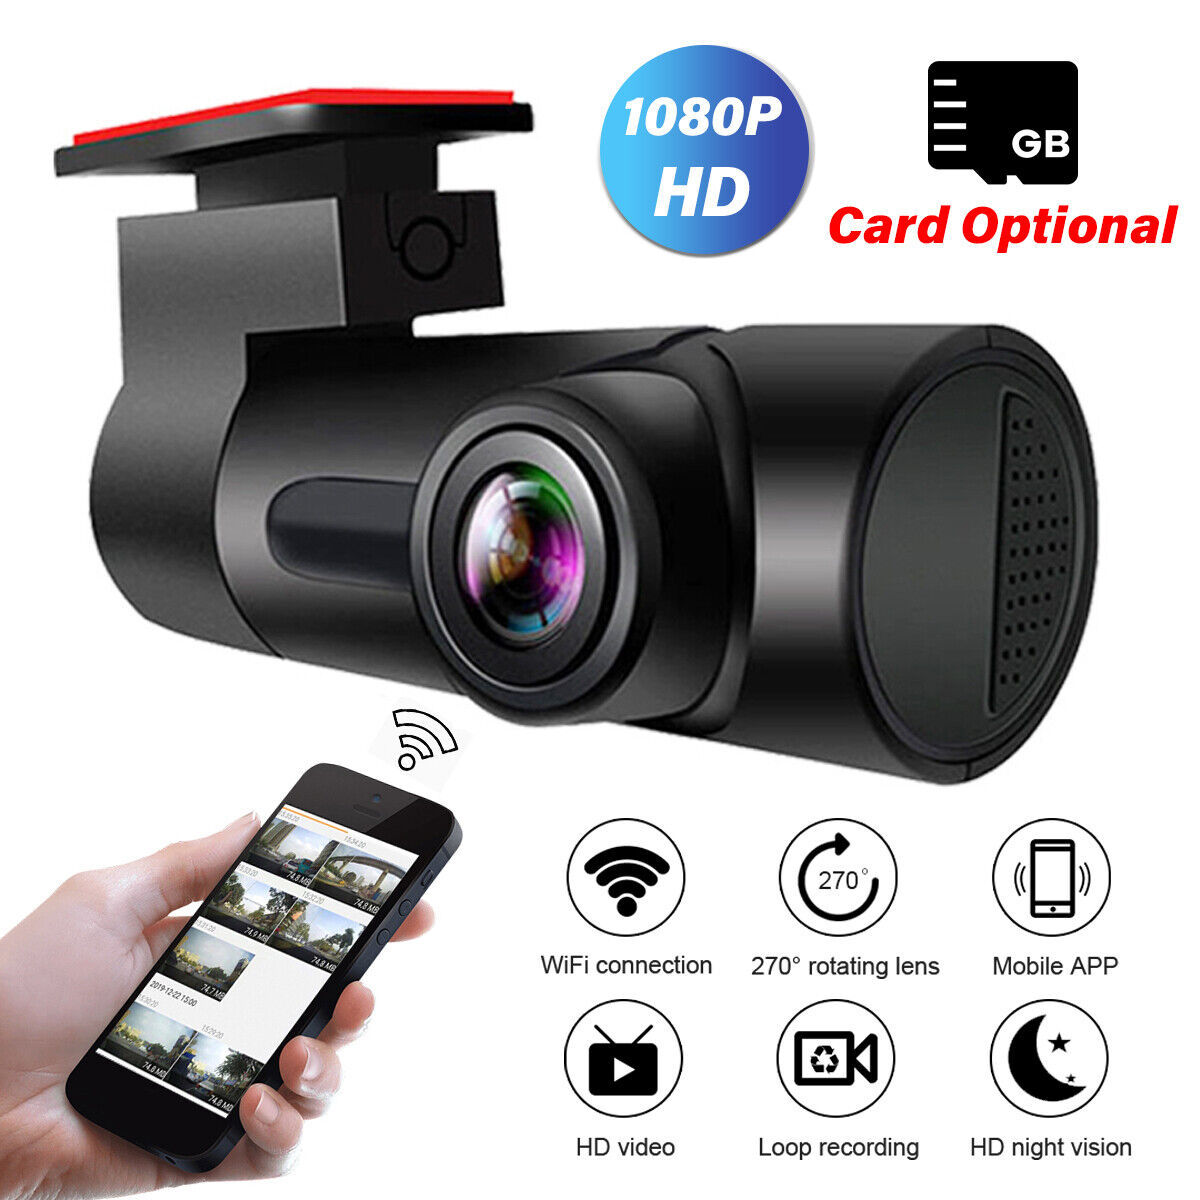 Dash Cam Pro WiFi Camera Car Recorder DVR HD 1080P Night-Vision Hidden Camcorder Unbranded Does Not Apply